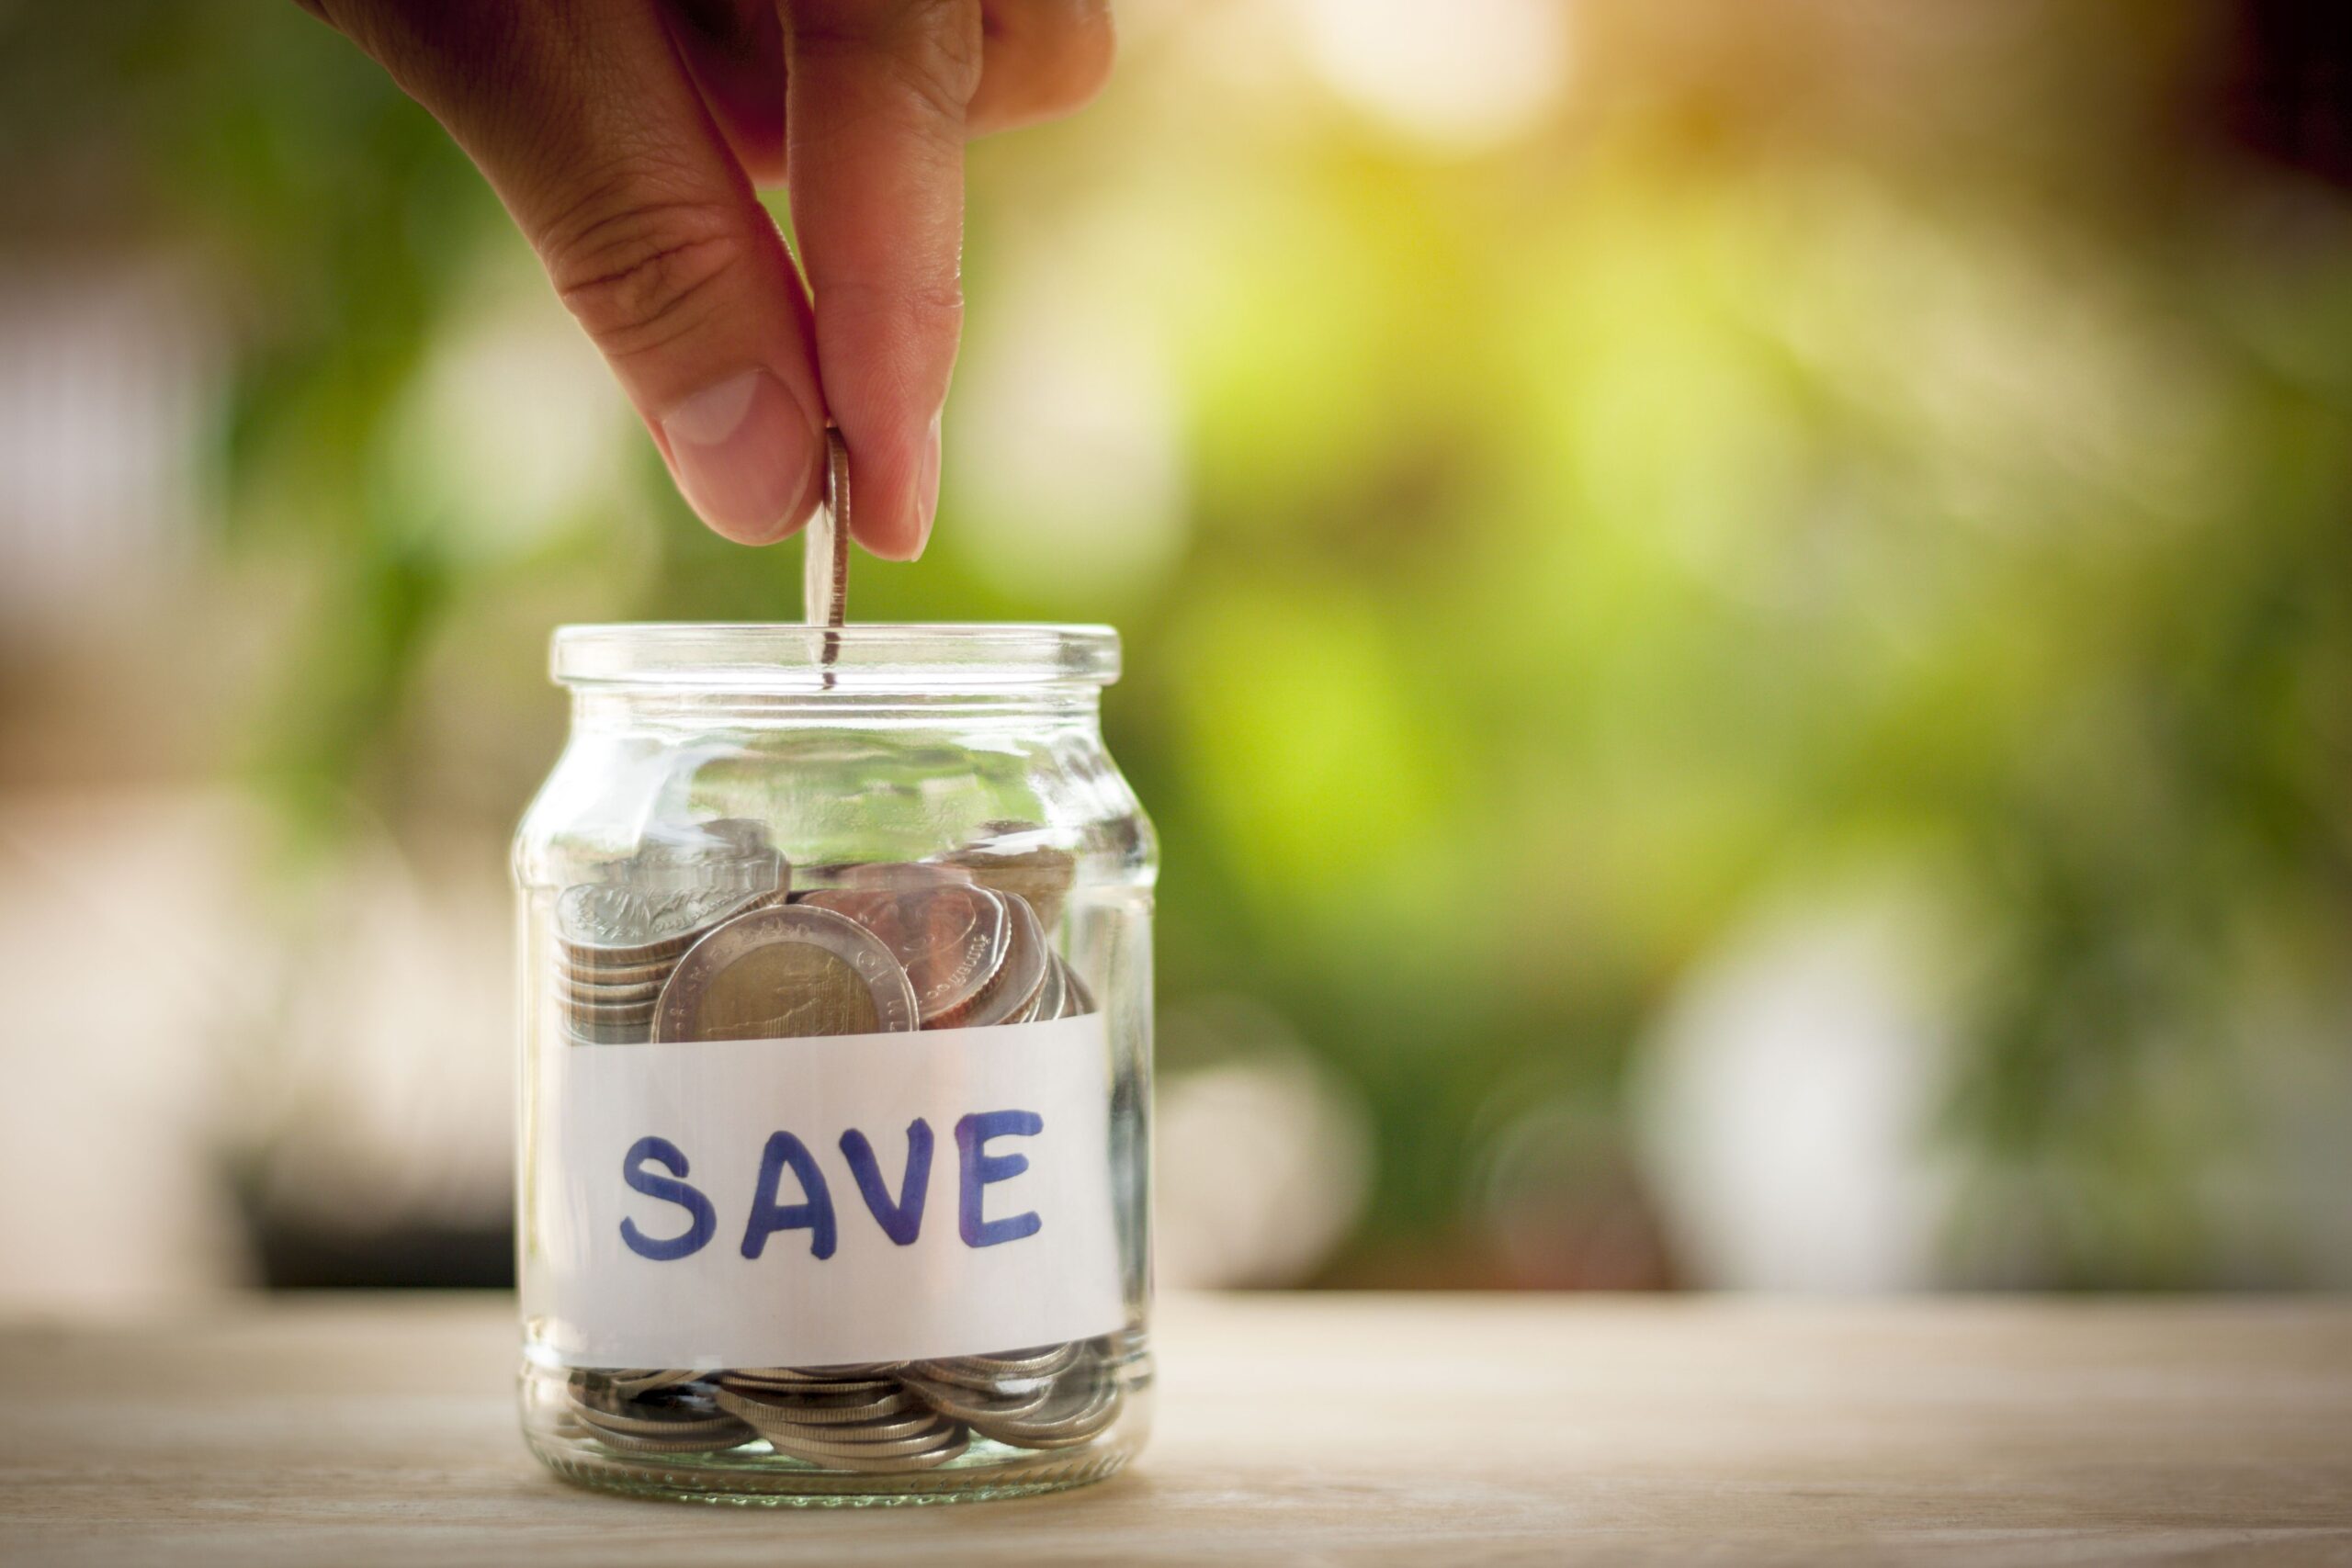 Can I save while in a Debt Management Plan